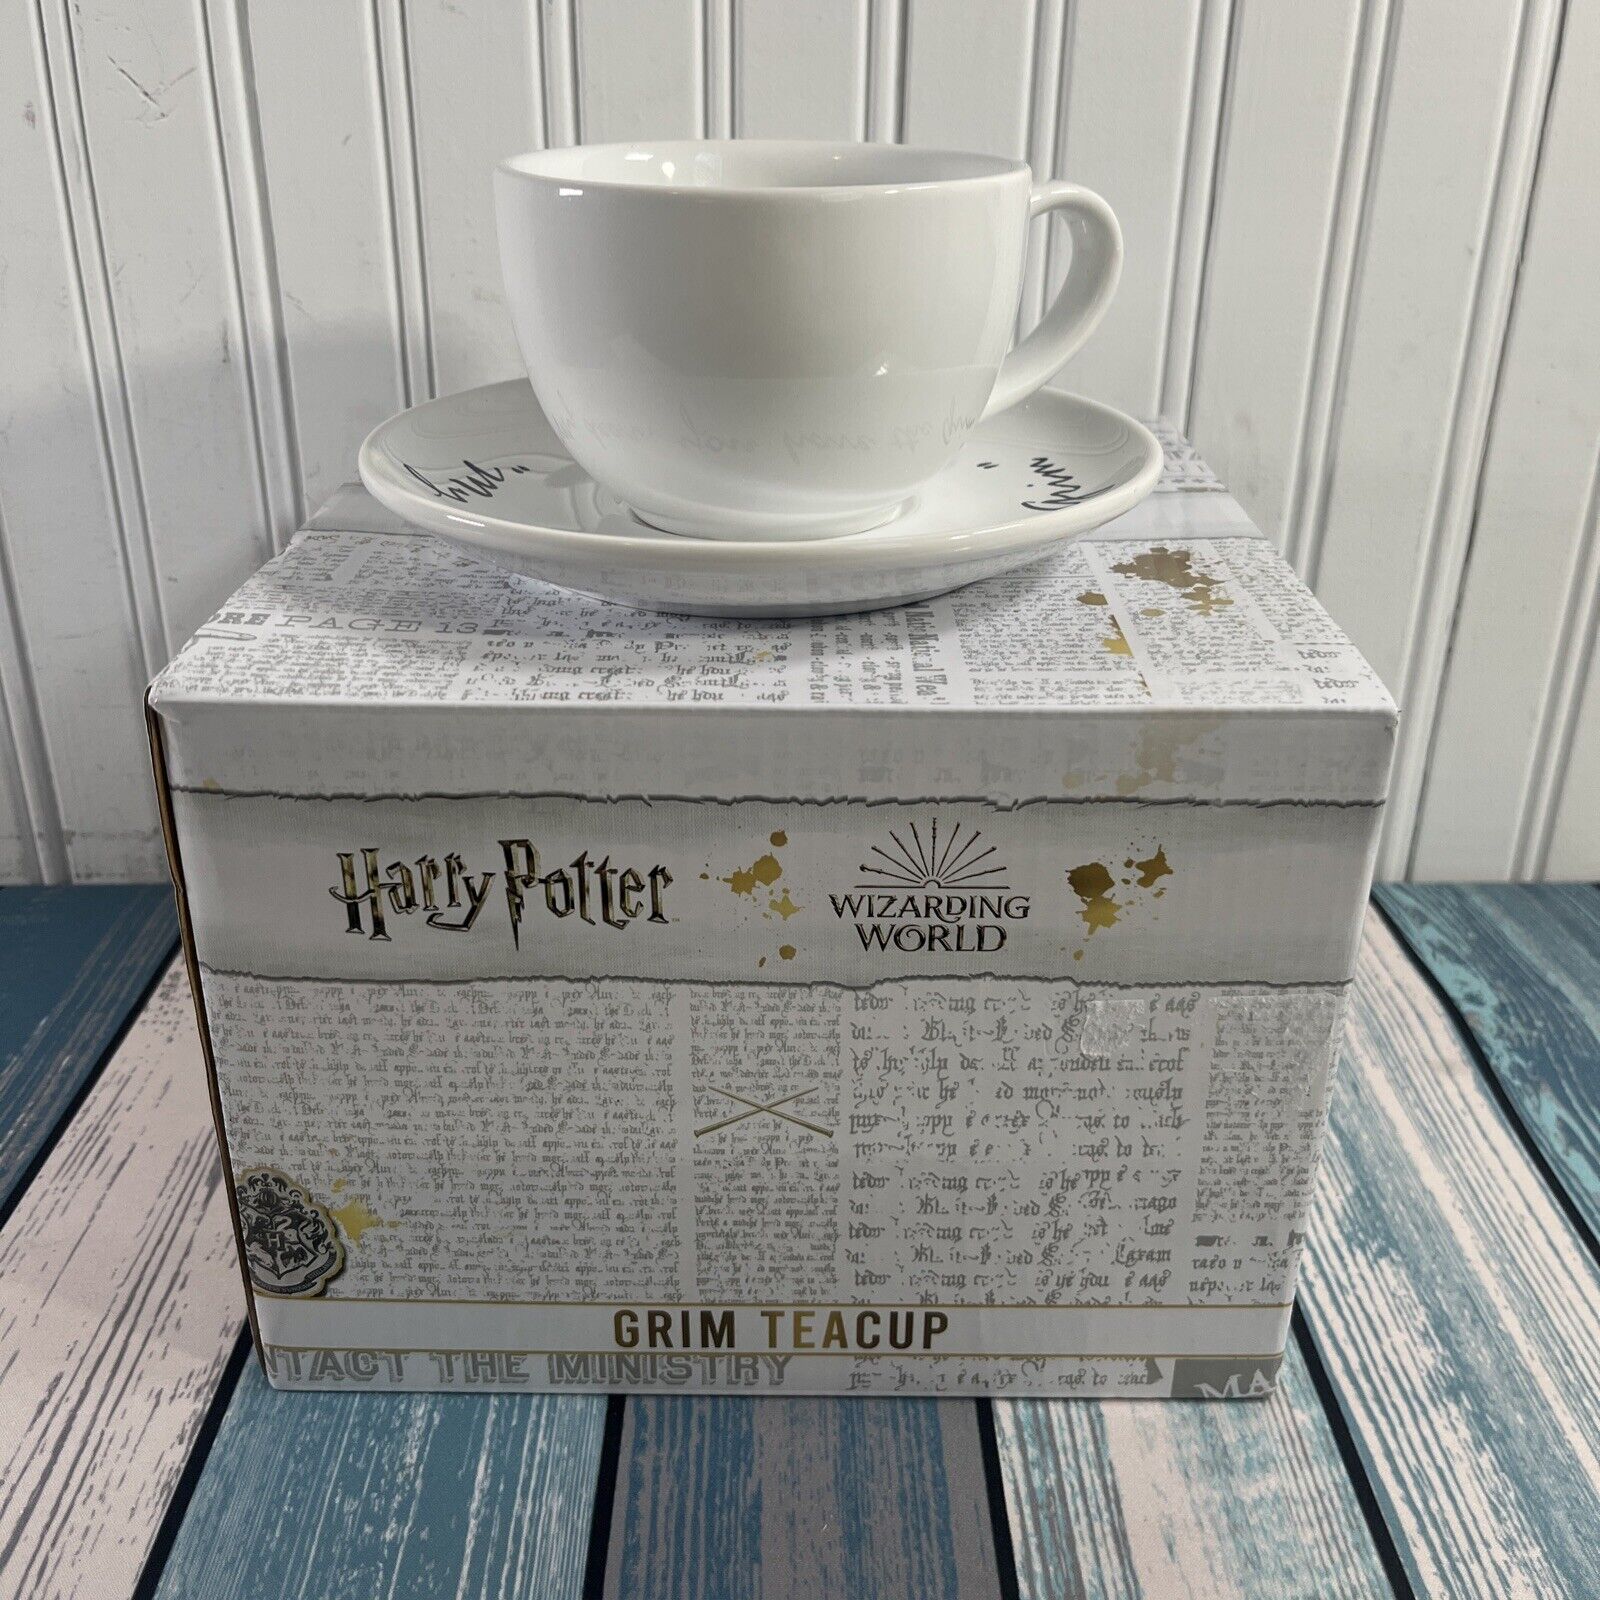 Loot Crate Wizarding World HARRY POTTER The Grim Teacup & Saucer